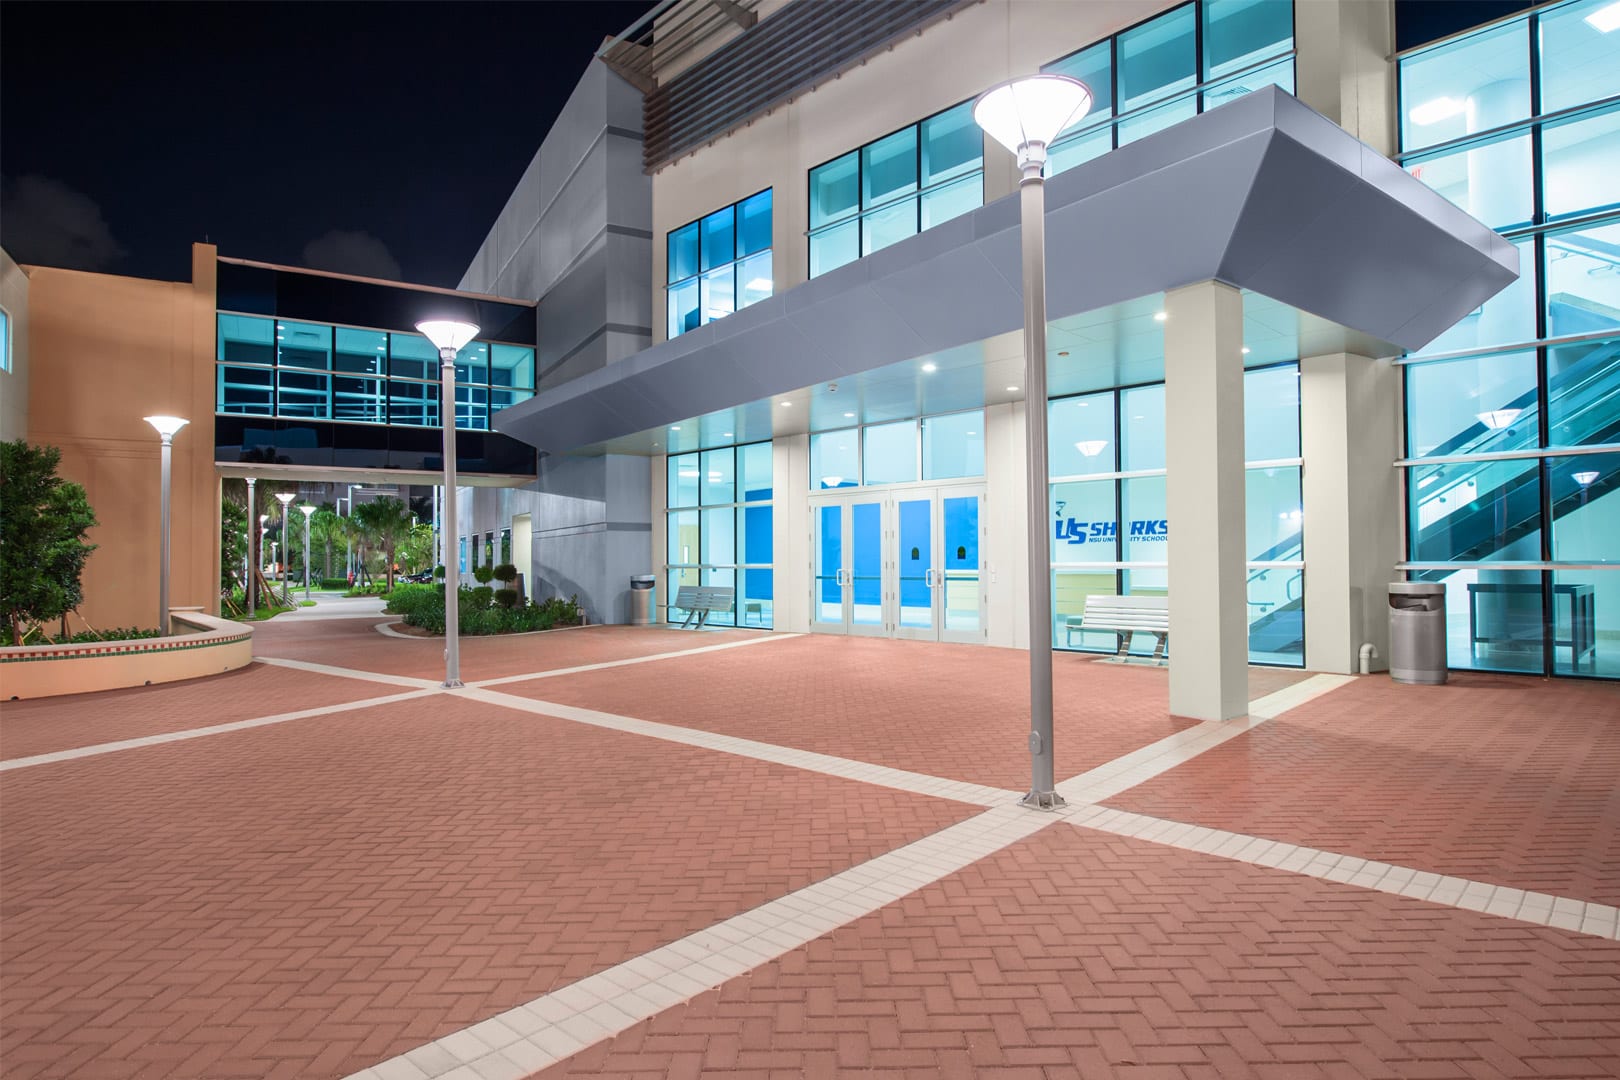 Grycon Nova Southeastern University View from outside of lobby of NSU University School by front doors with red bricked patio stones and lighting.